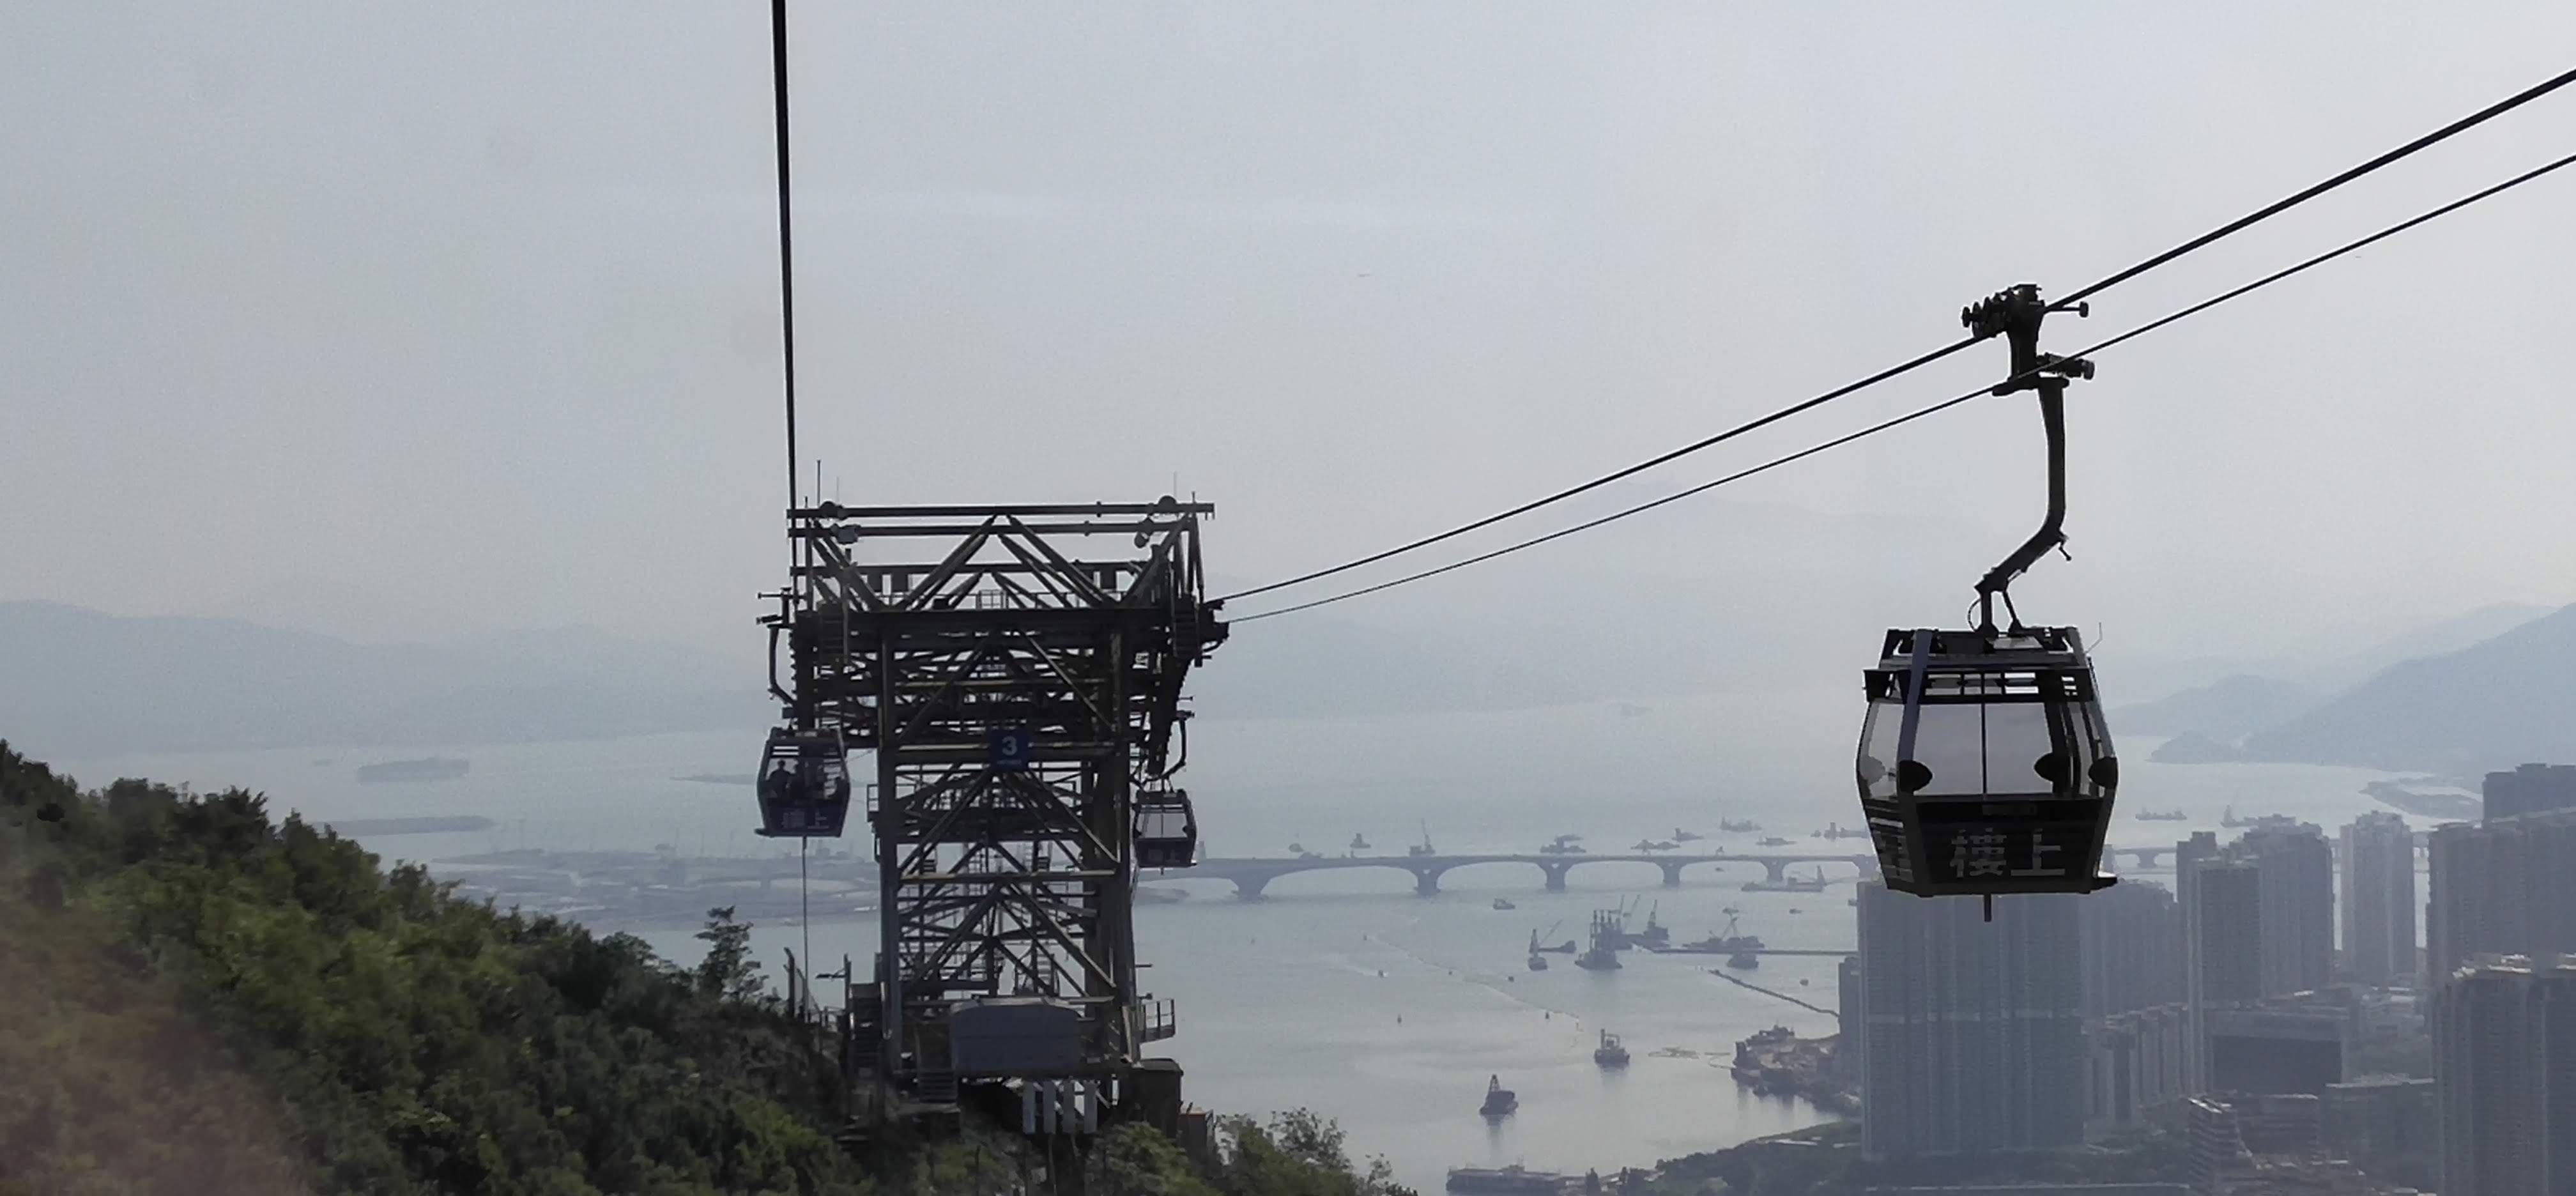 misty weather, cable car tower, cable car cabins, sea, bridge